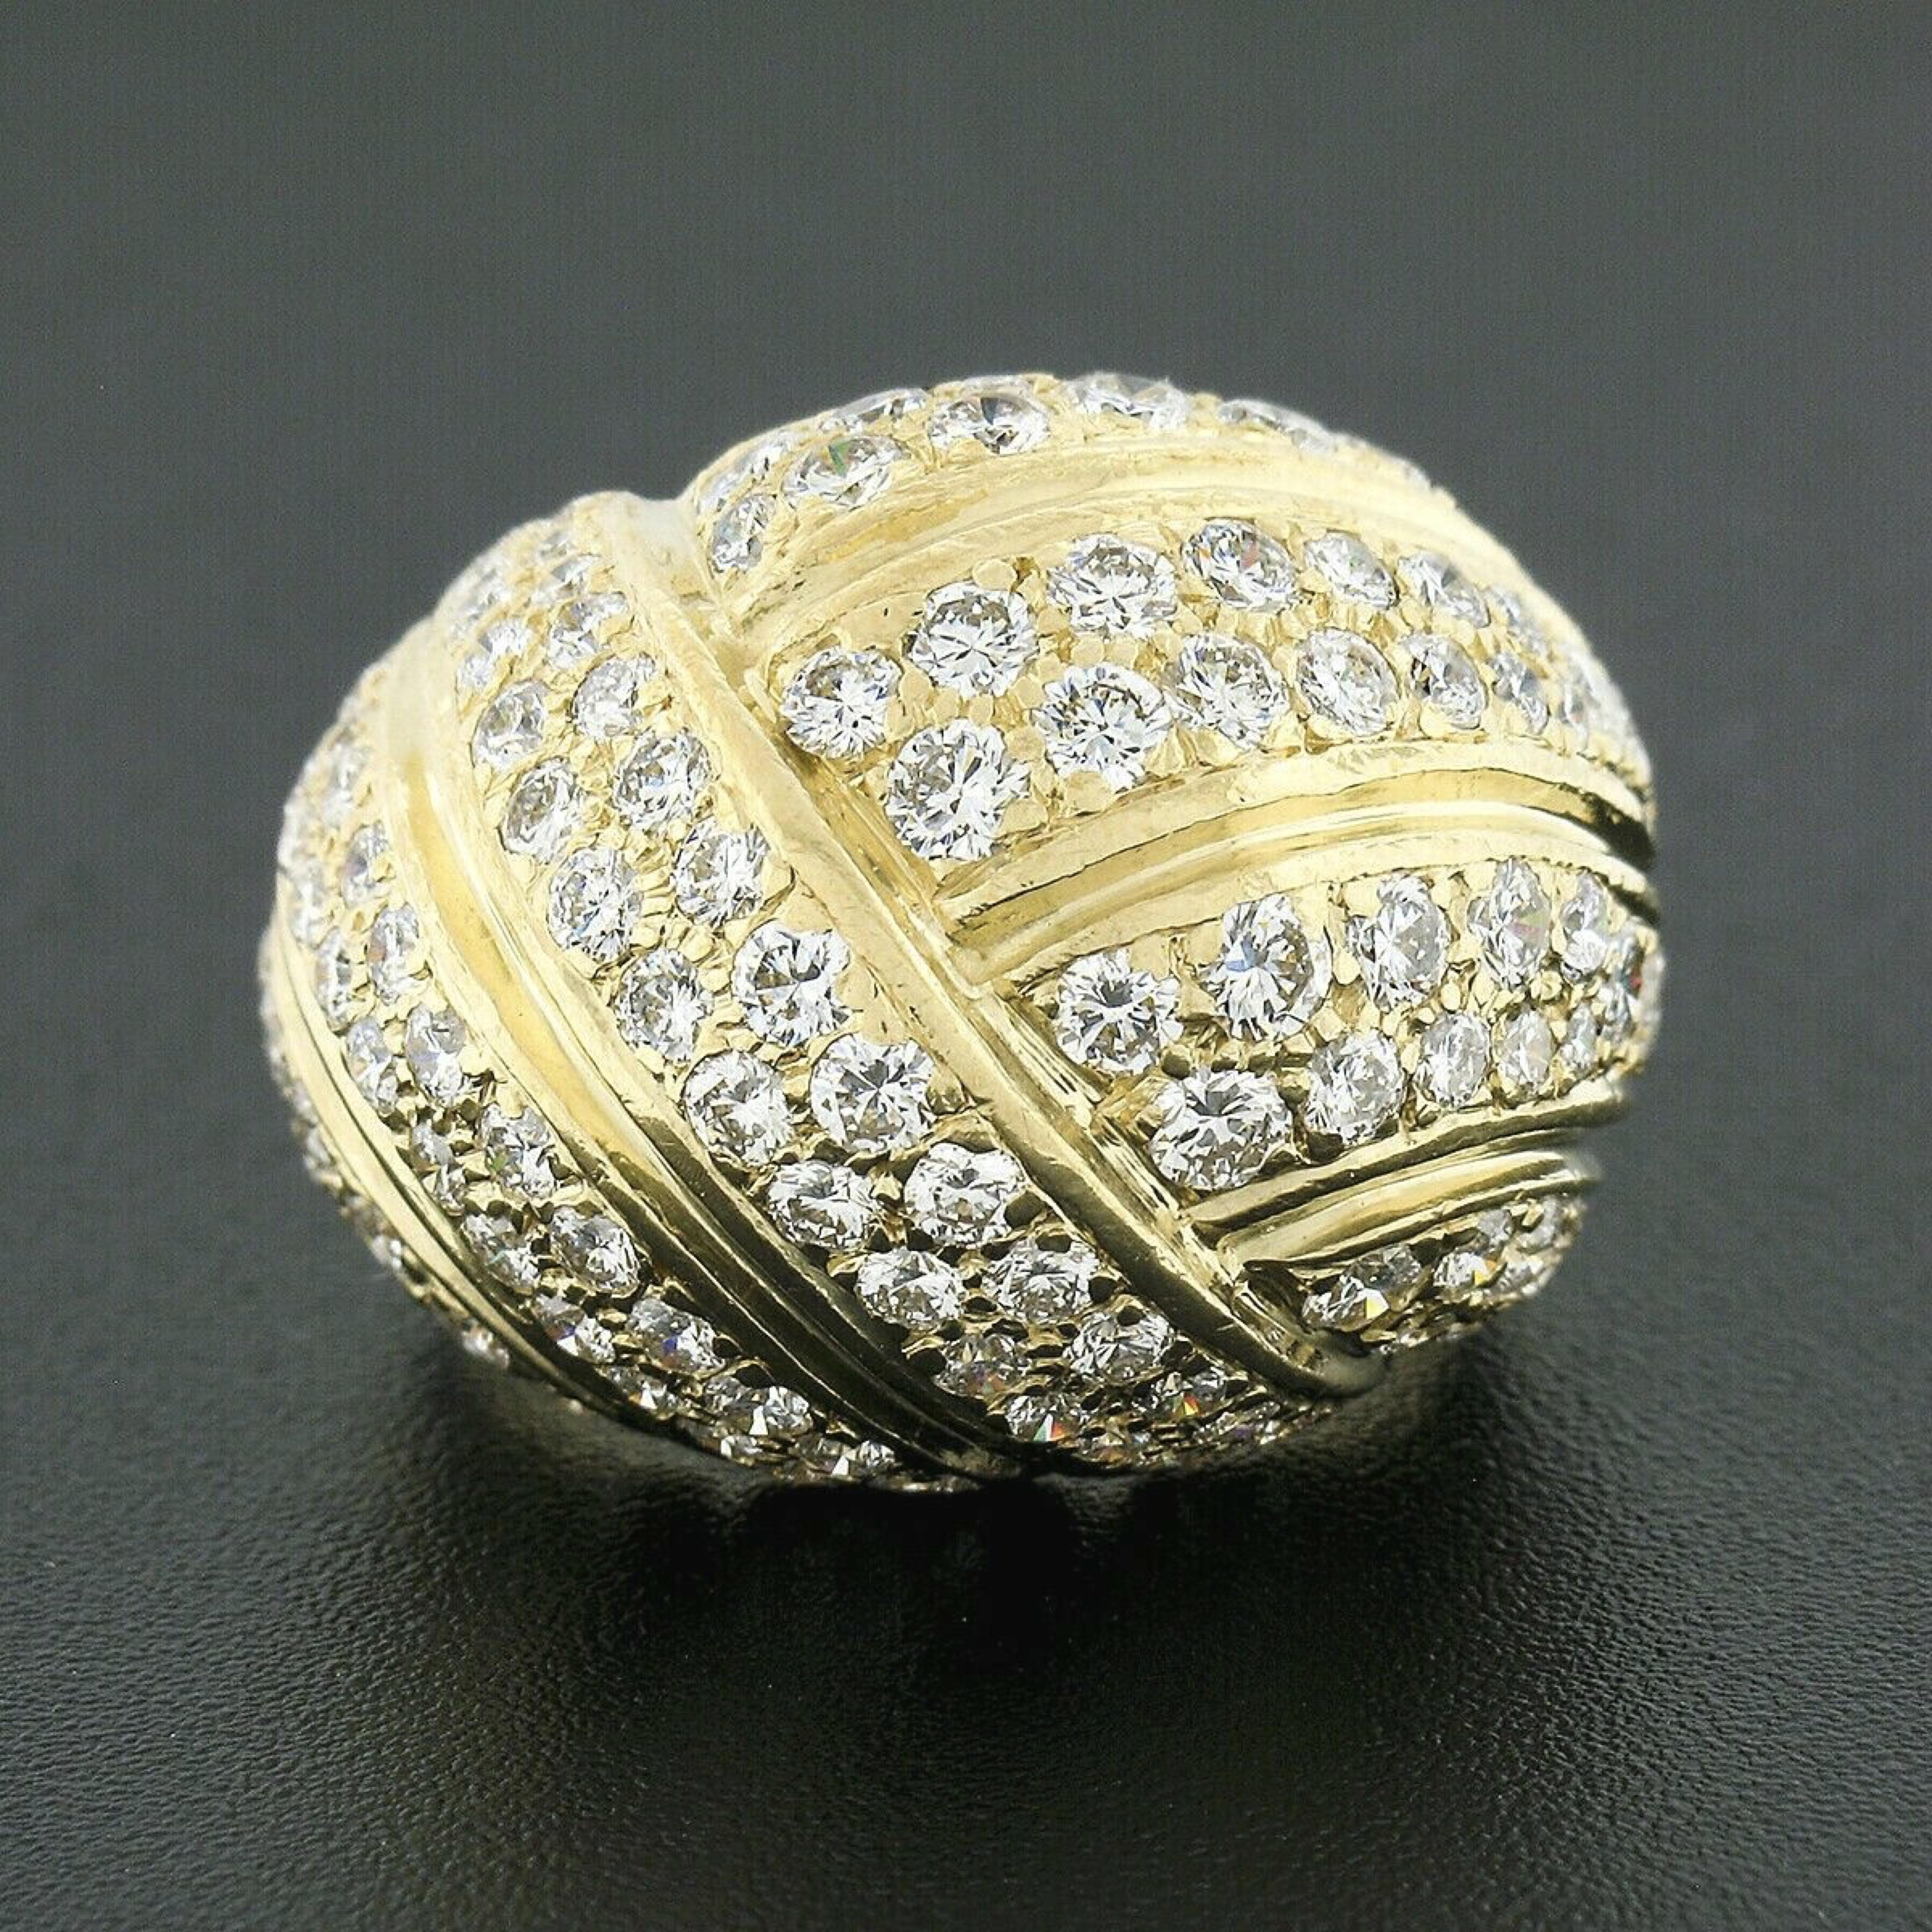 This breathtaking and bold bombe style ring was crafted in solid 18k yellow gold and designed by Gemlok. Its domed top features an absolutely elegant, grooved and overlapping design that is drenched with TOP QUALITY diamonds throughout. These round